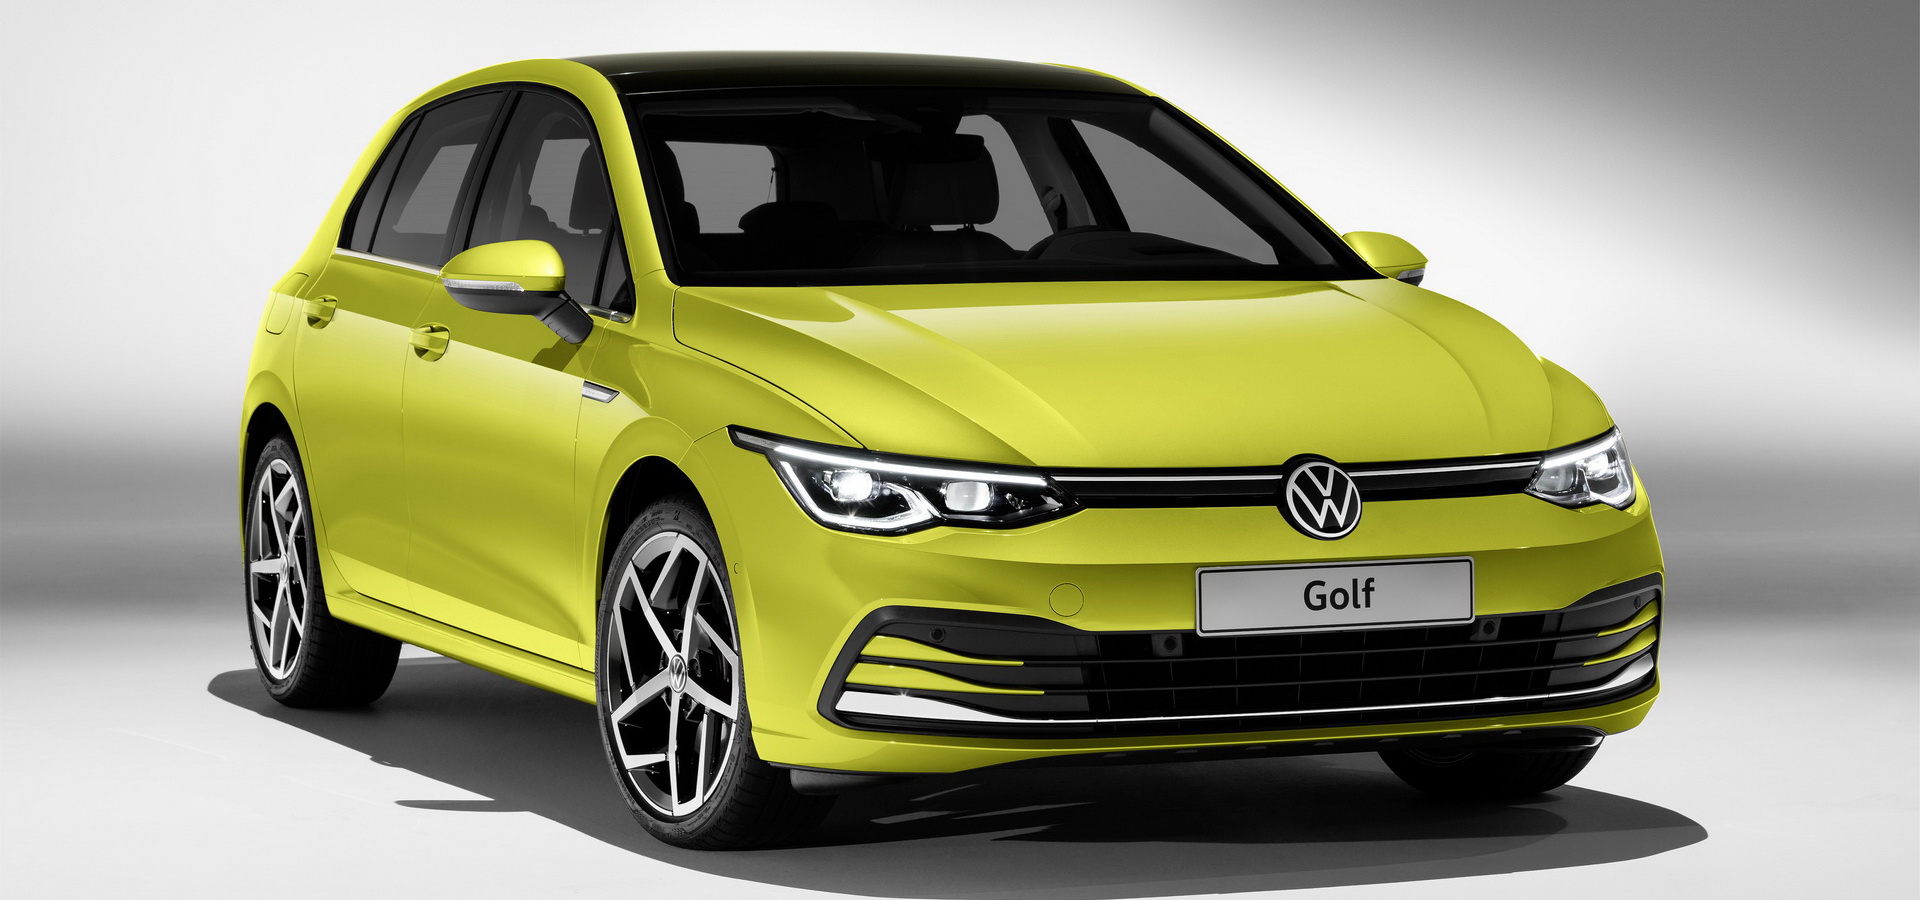 Hoofdstraat Onheil Bederven 2020 VW Golf: Here Are All The Details, From Design To Engines And Tech,  Plus 88 Images | Carscoops